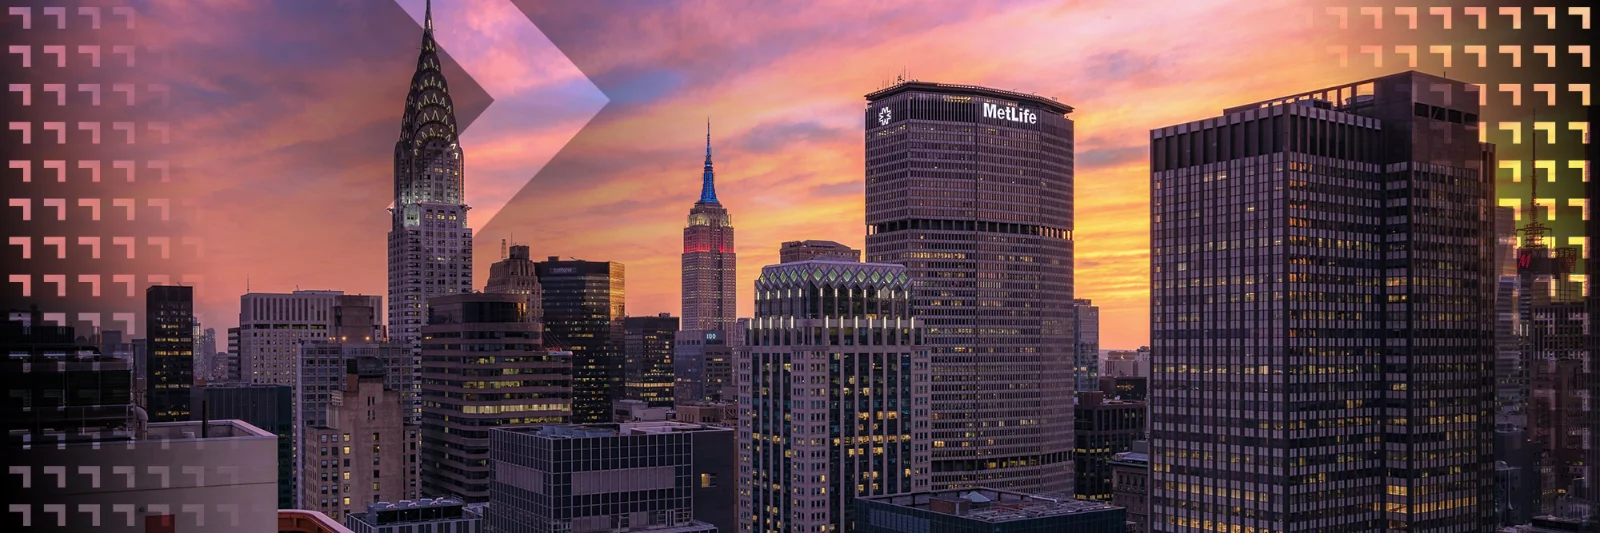 Stunning New York City skyline at sunset, showcasing iconic architecture like the Chrysler Building and MetLife Building against a colorful sky. Ideal representation of urban innovation and architectural beauty.